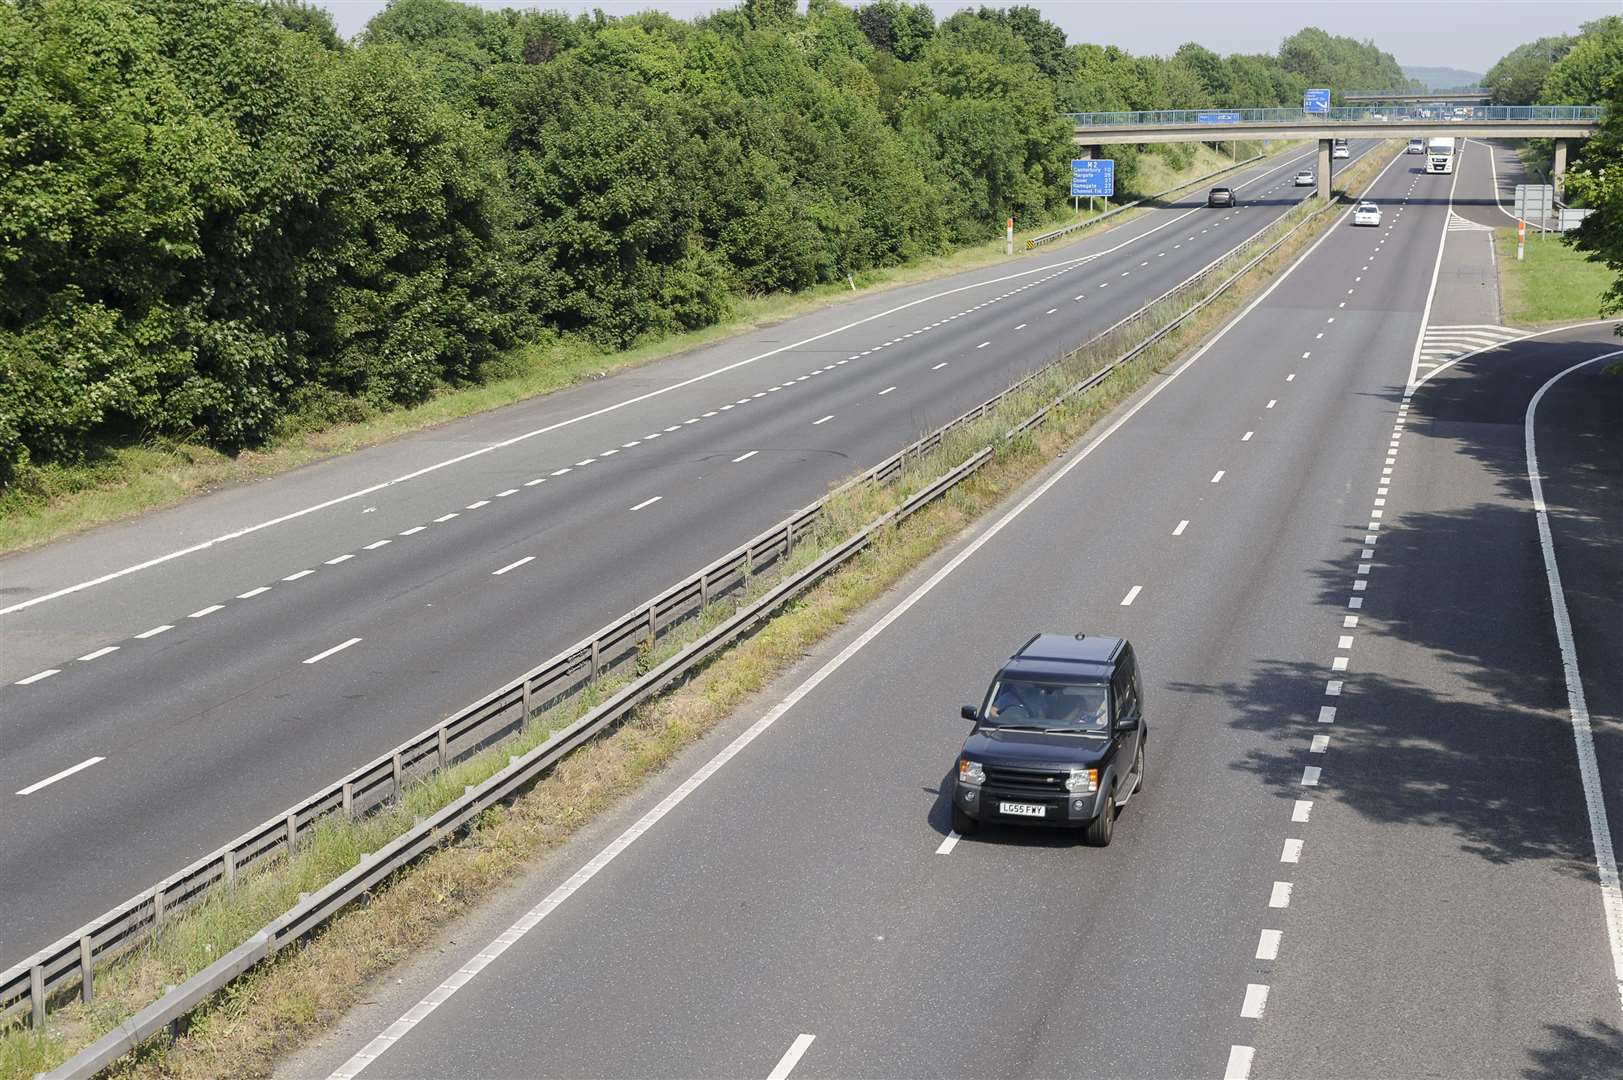 A man was arrested in Faversham accused of starting and abandoning a fire on the side of the M2